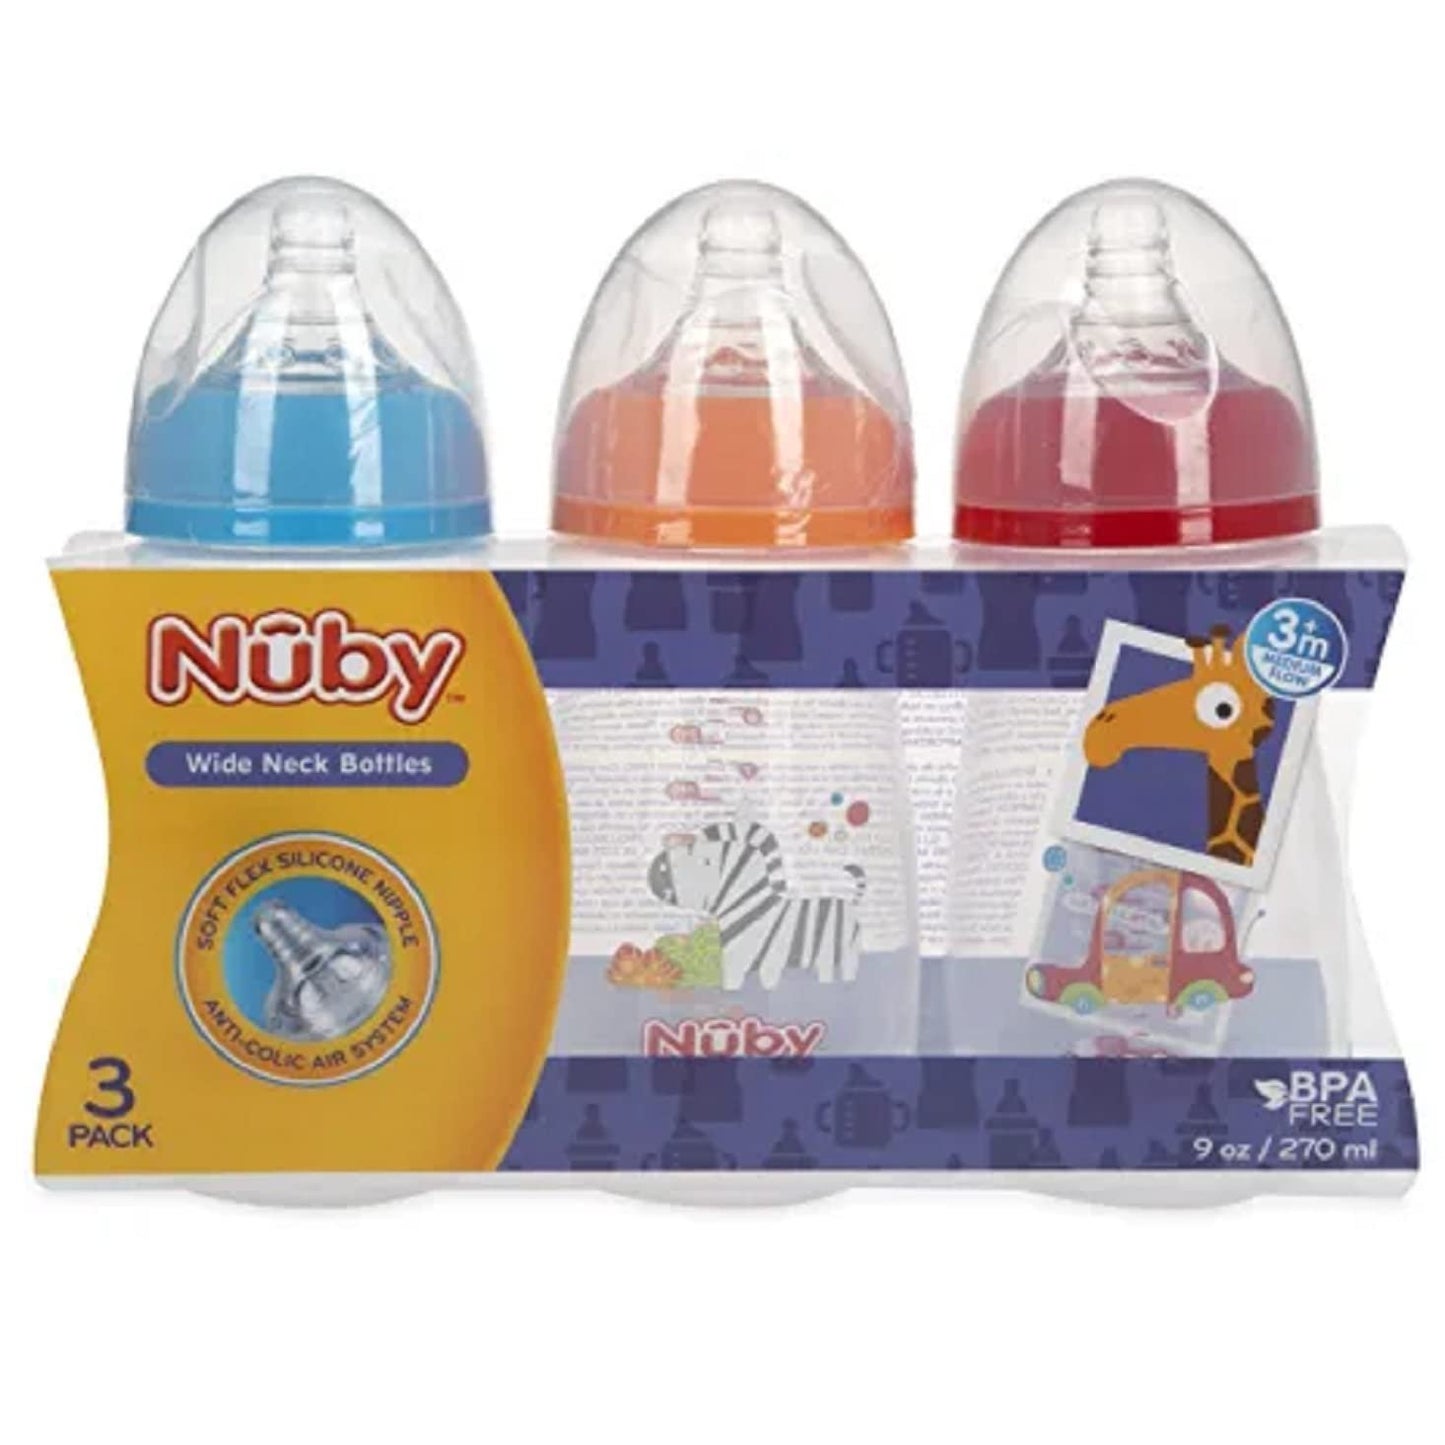 Nuby Tritan Wide Neck Non-Drip Bottles with Anti-Colic Air System: 9oz./ 270 Ml, 3 Pack, 0M+,Blue/Orange/red